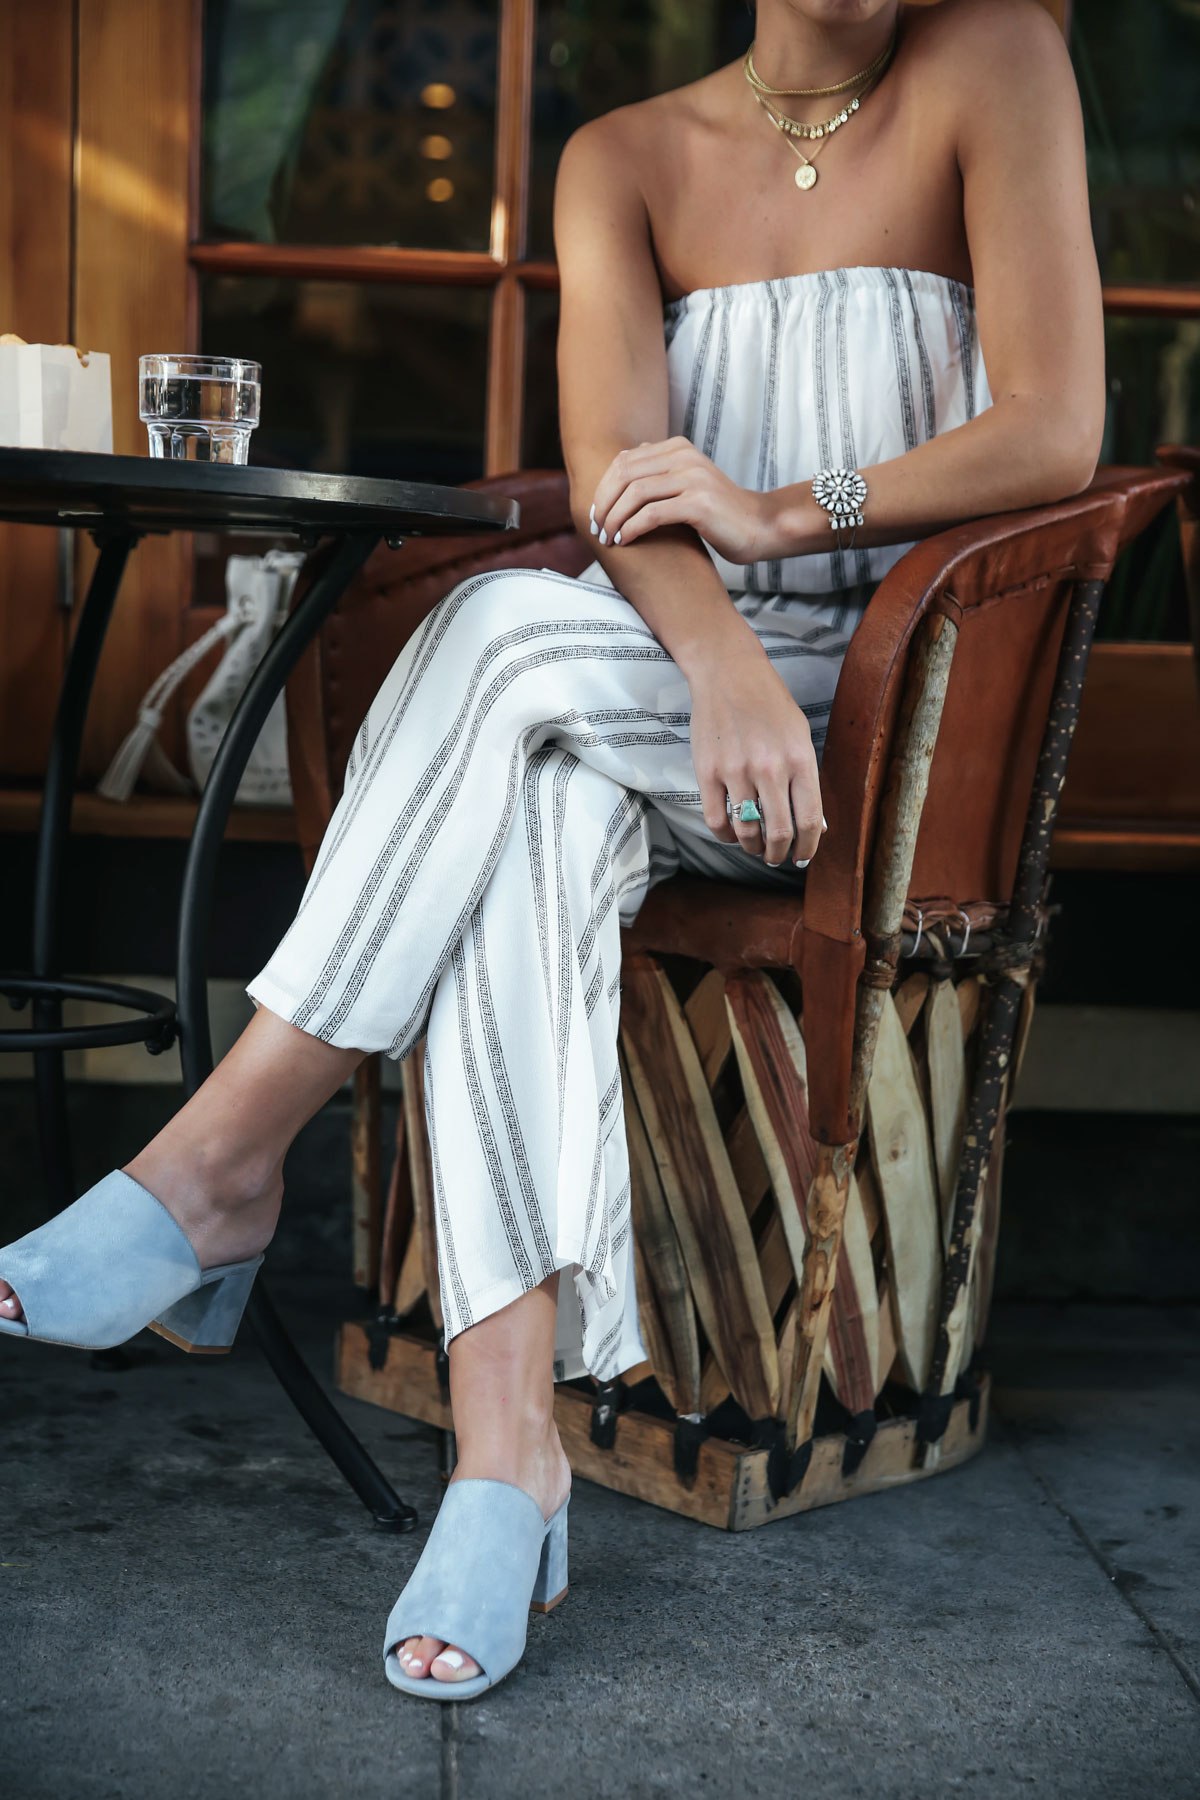 urban outfitters jumpsuit for happy hour at Flores